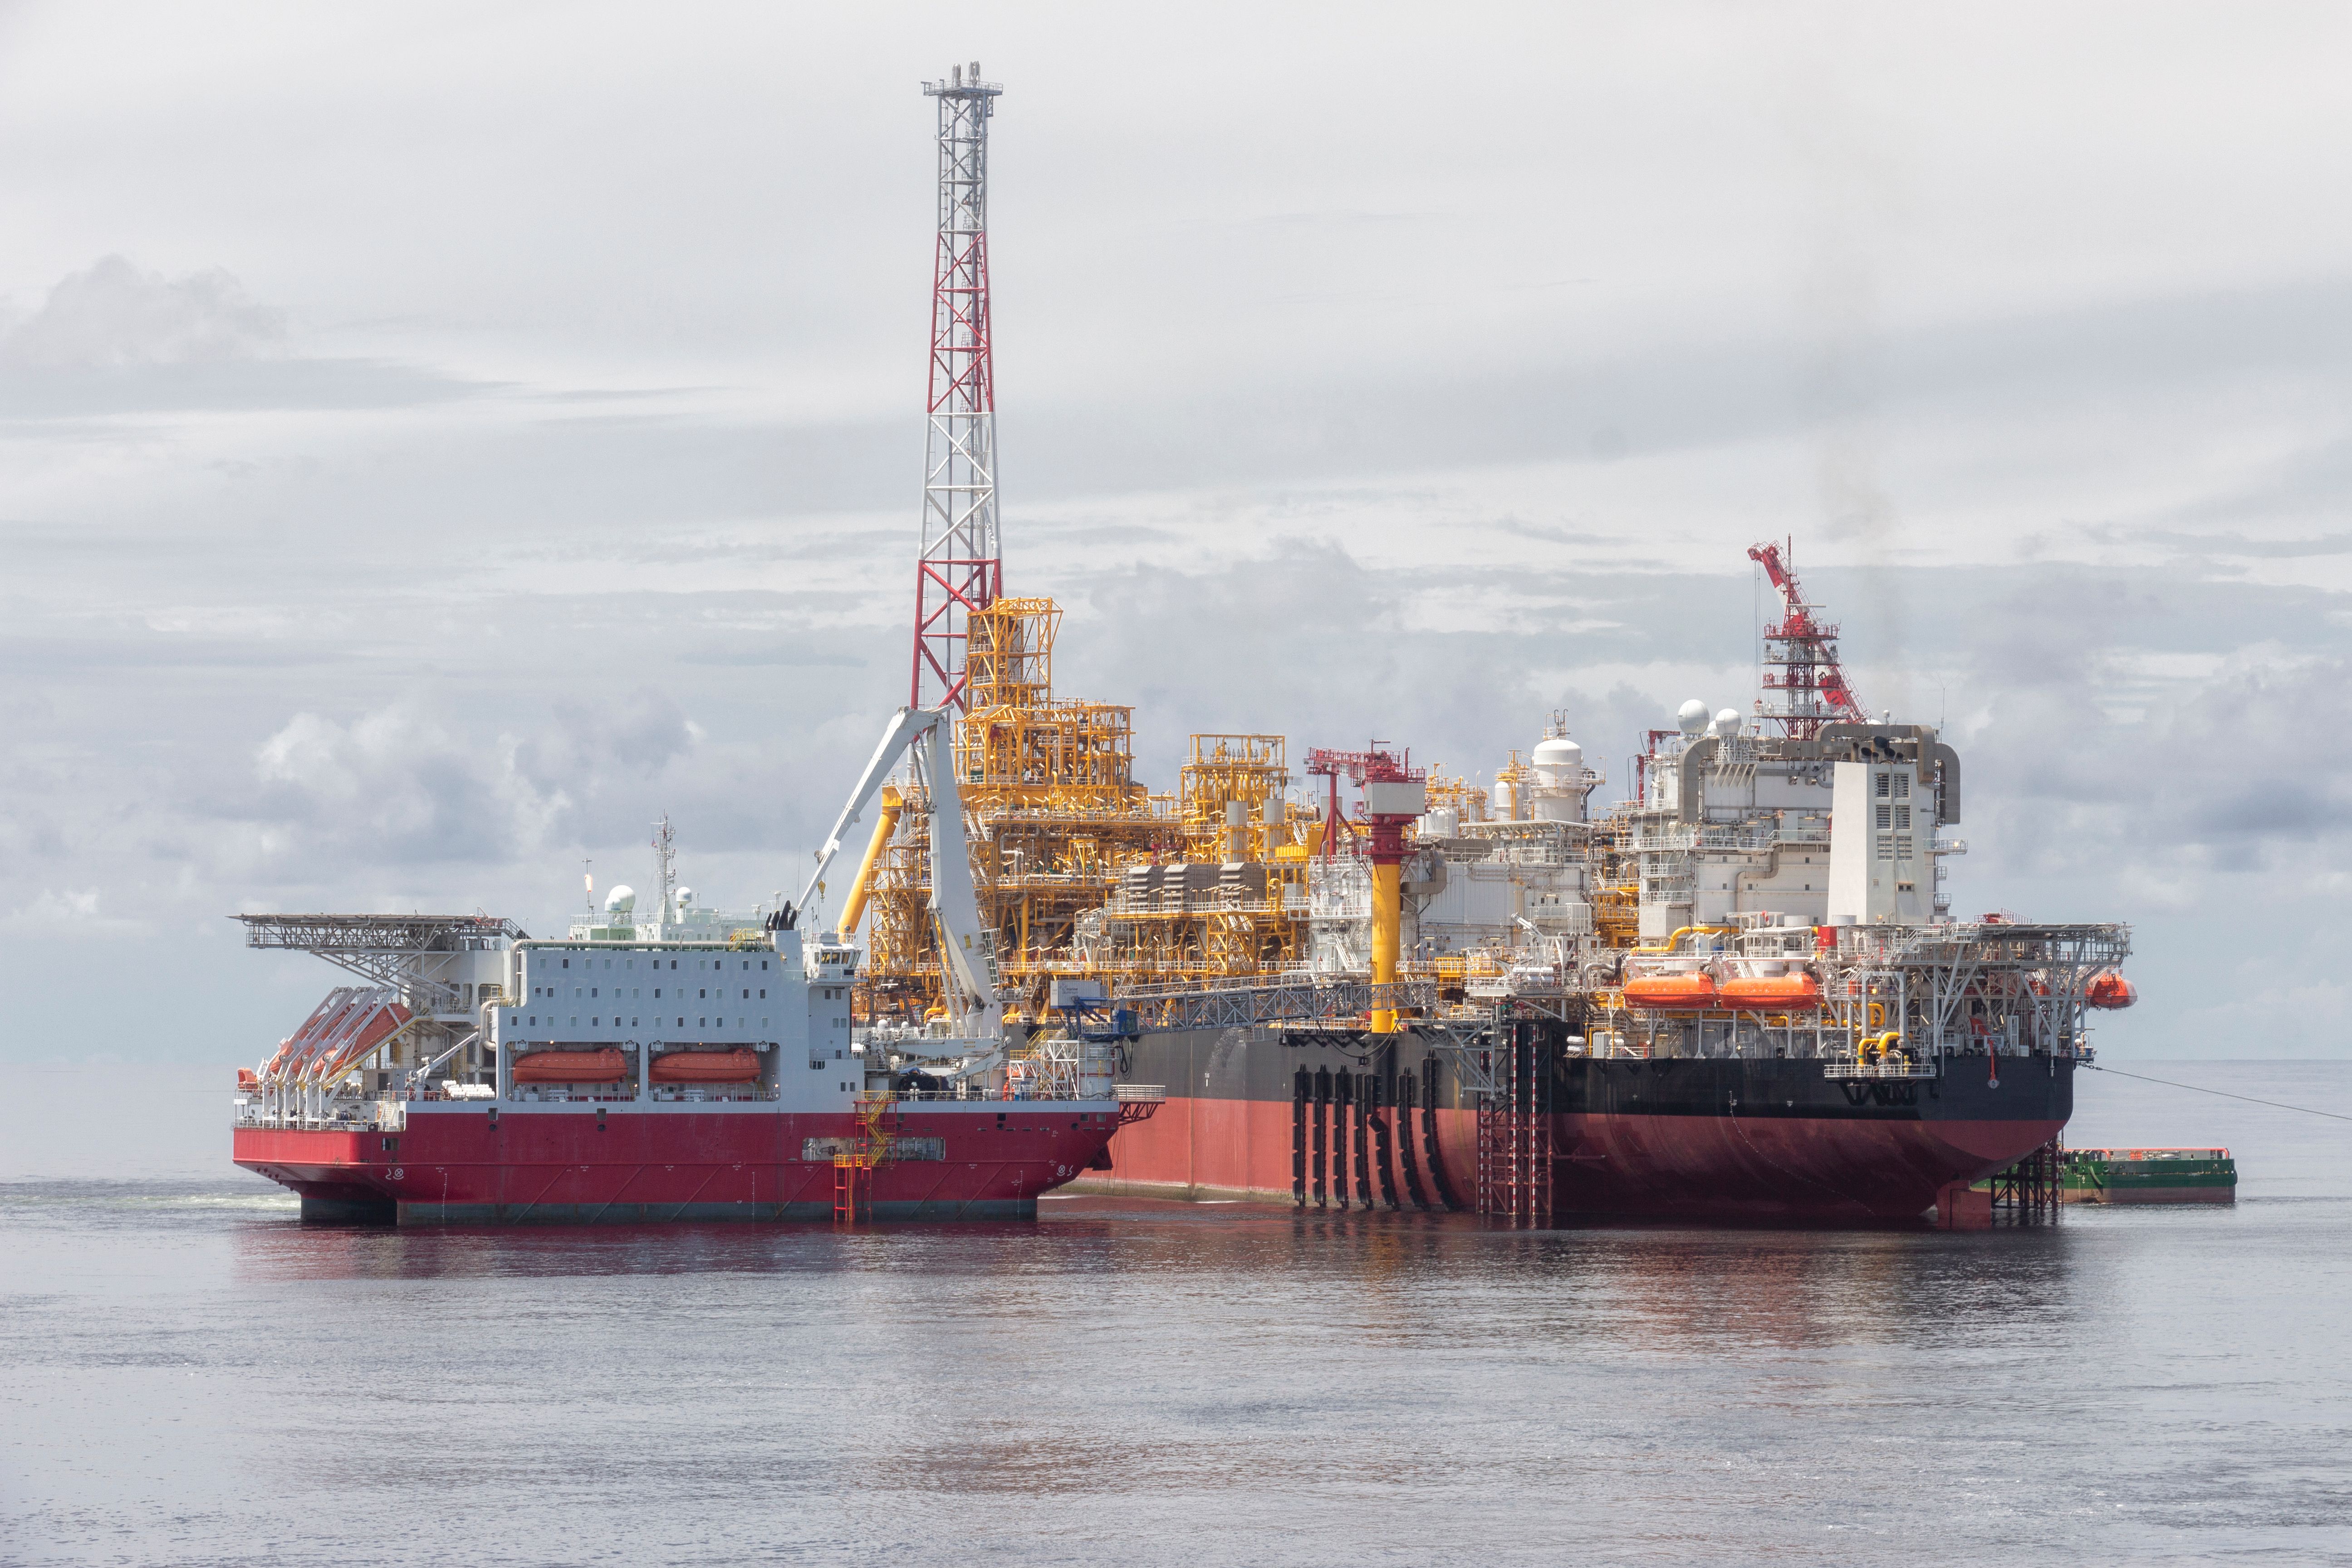 SBM signs FPSO contracts for ExxonMobil's Guyana project